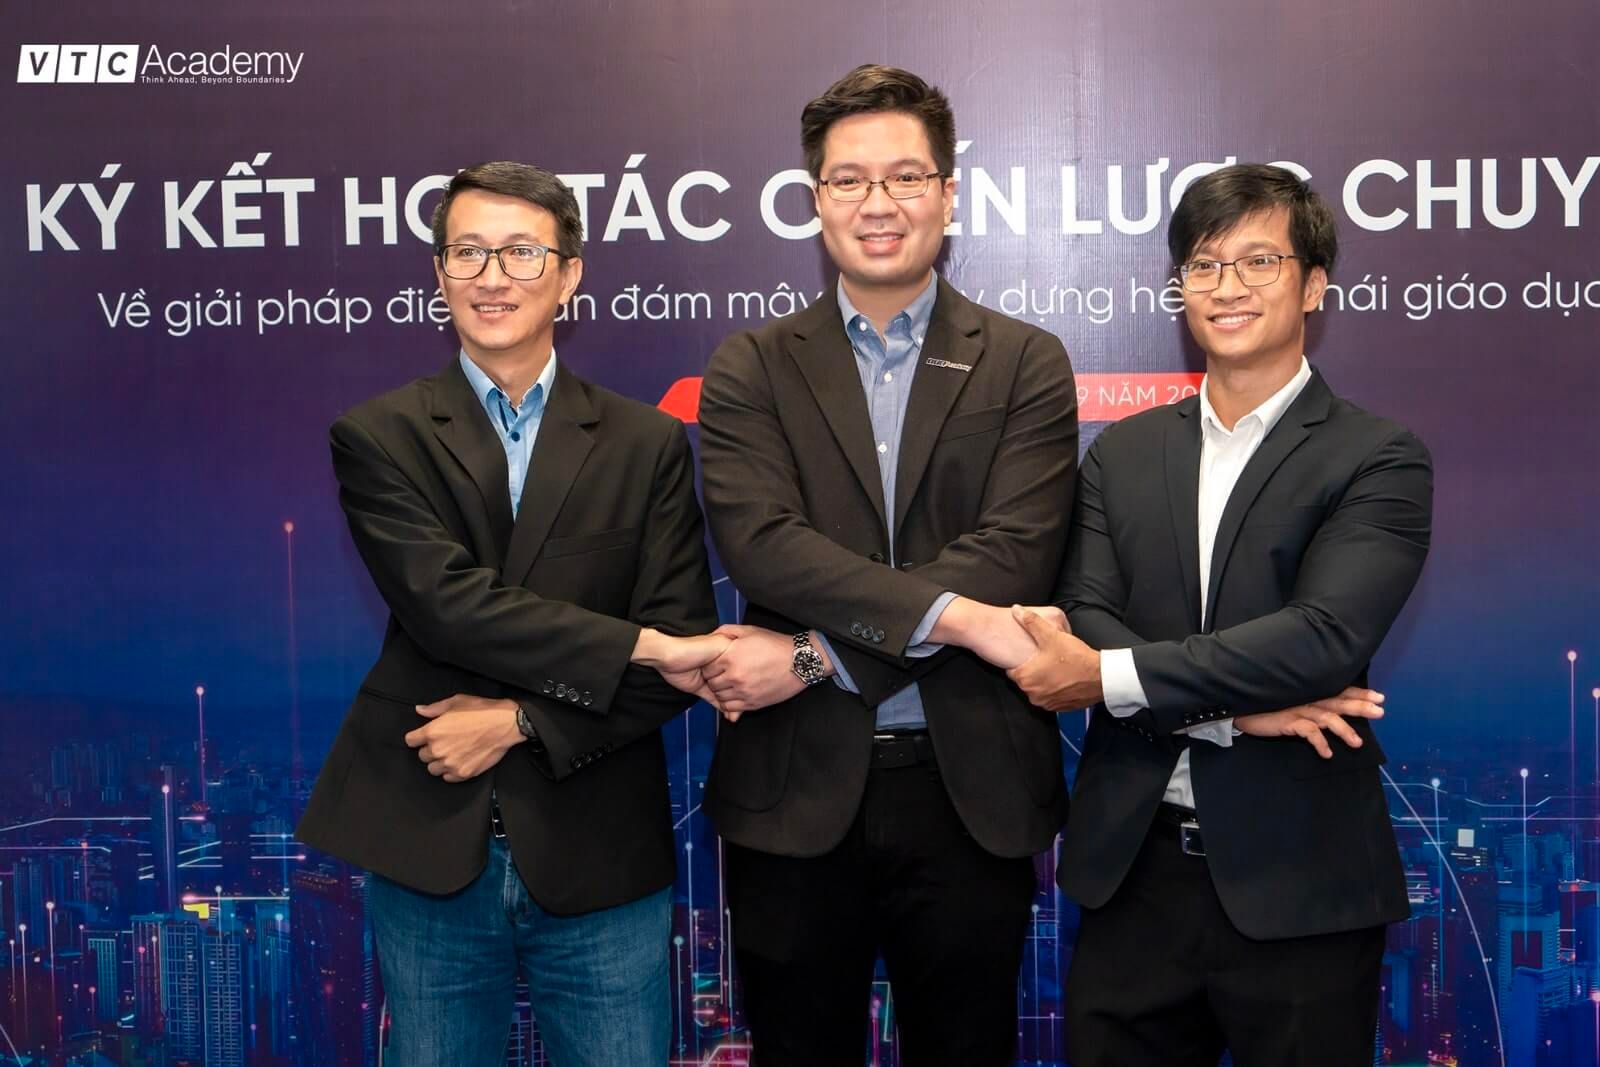 Review VTC Academy: Strategic cooperation agreement signed for cloud computing solutions and building intelligent education ecosystem with VNG Cloud.